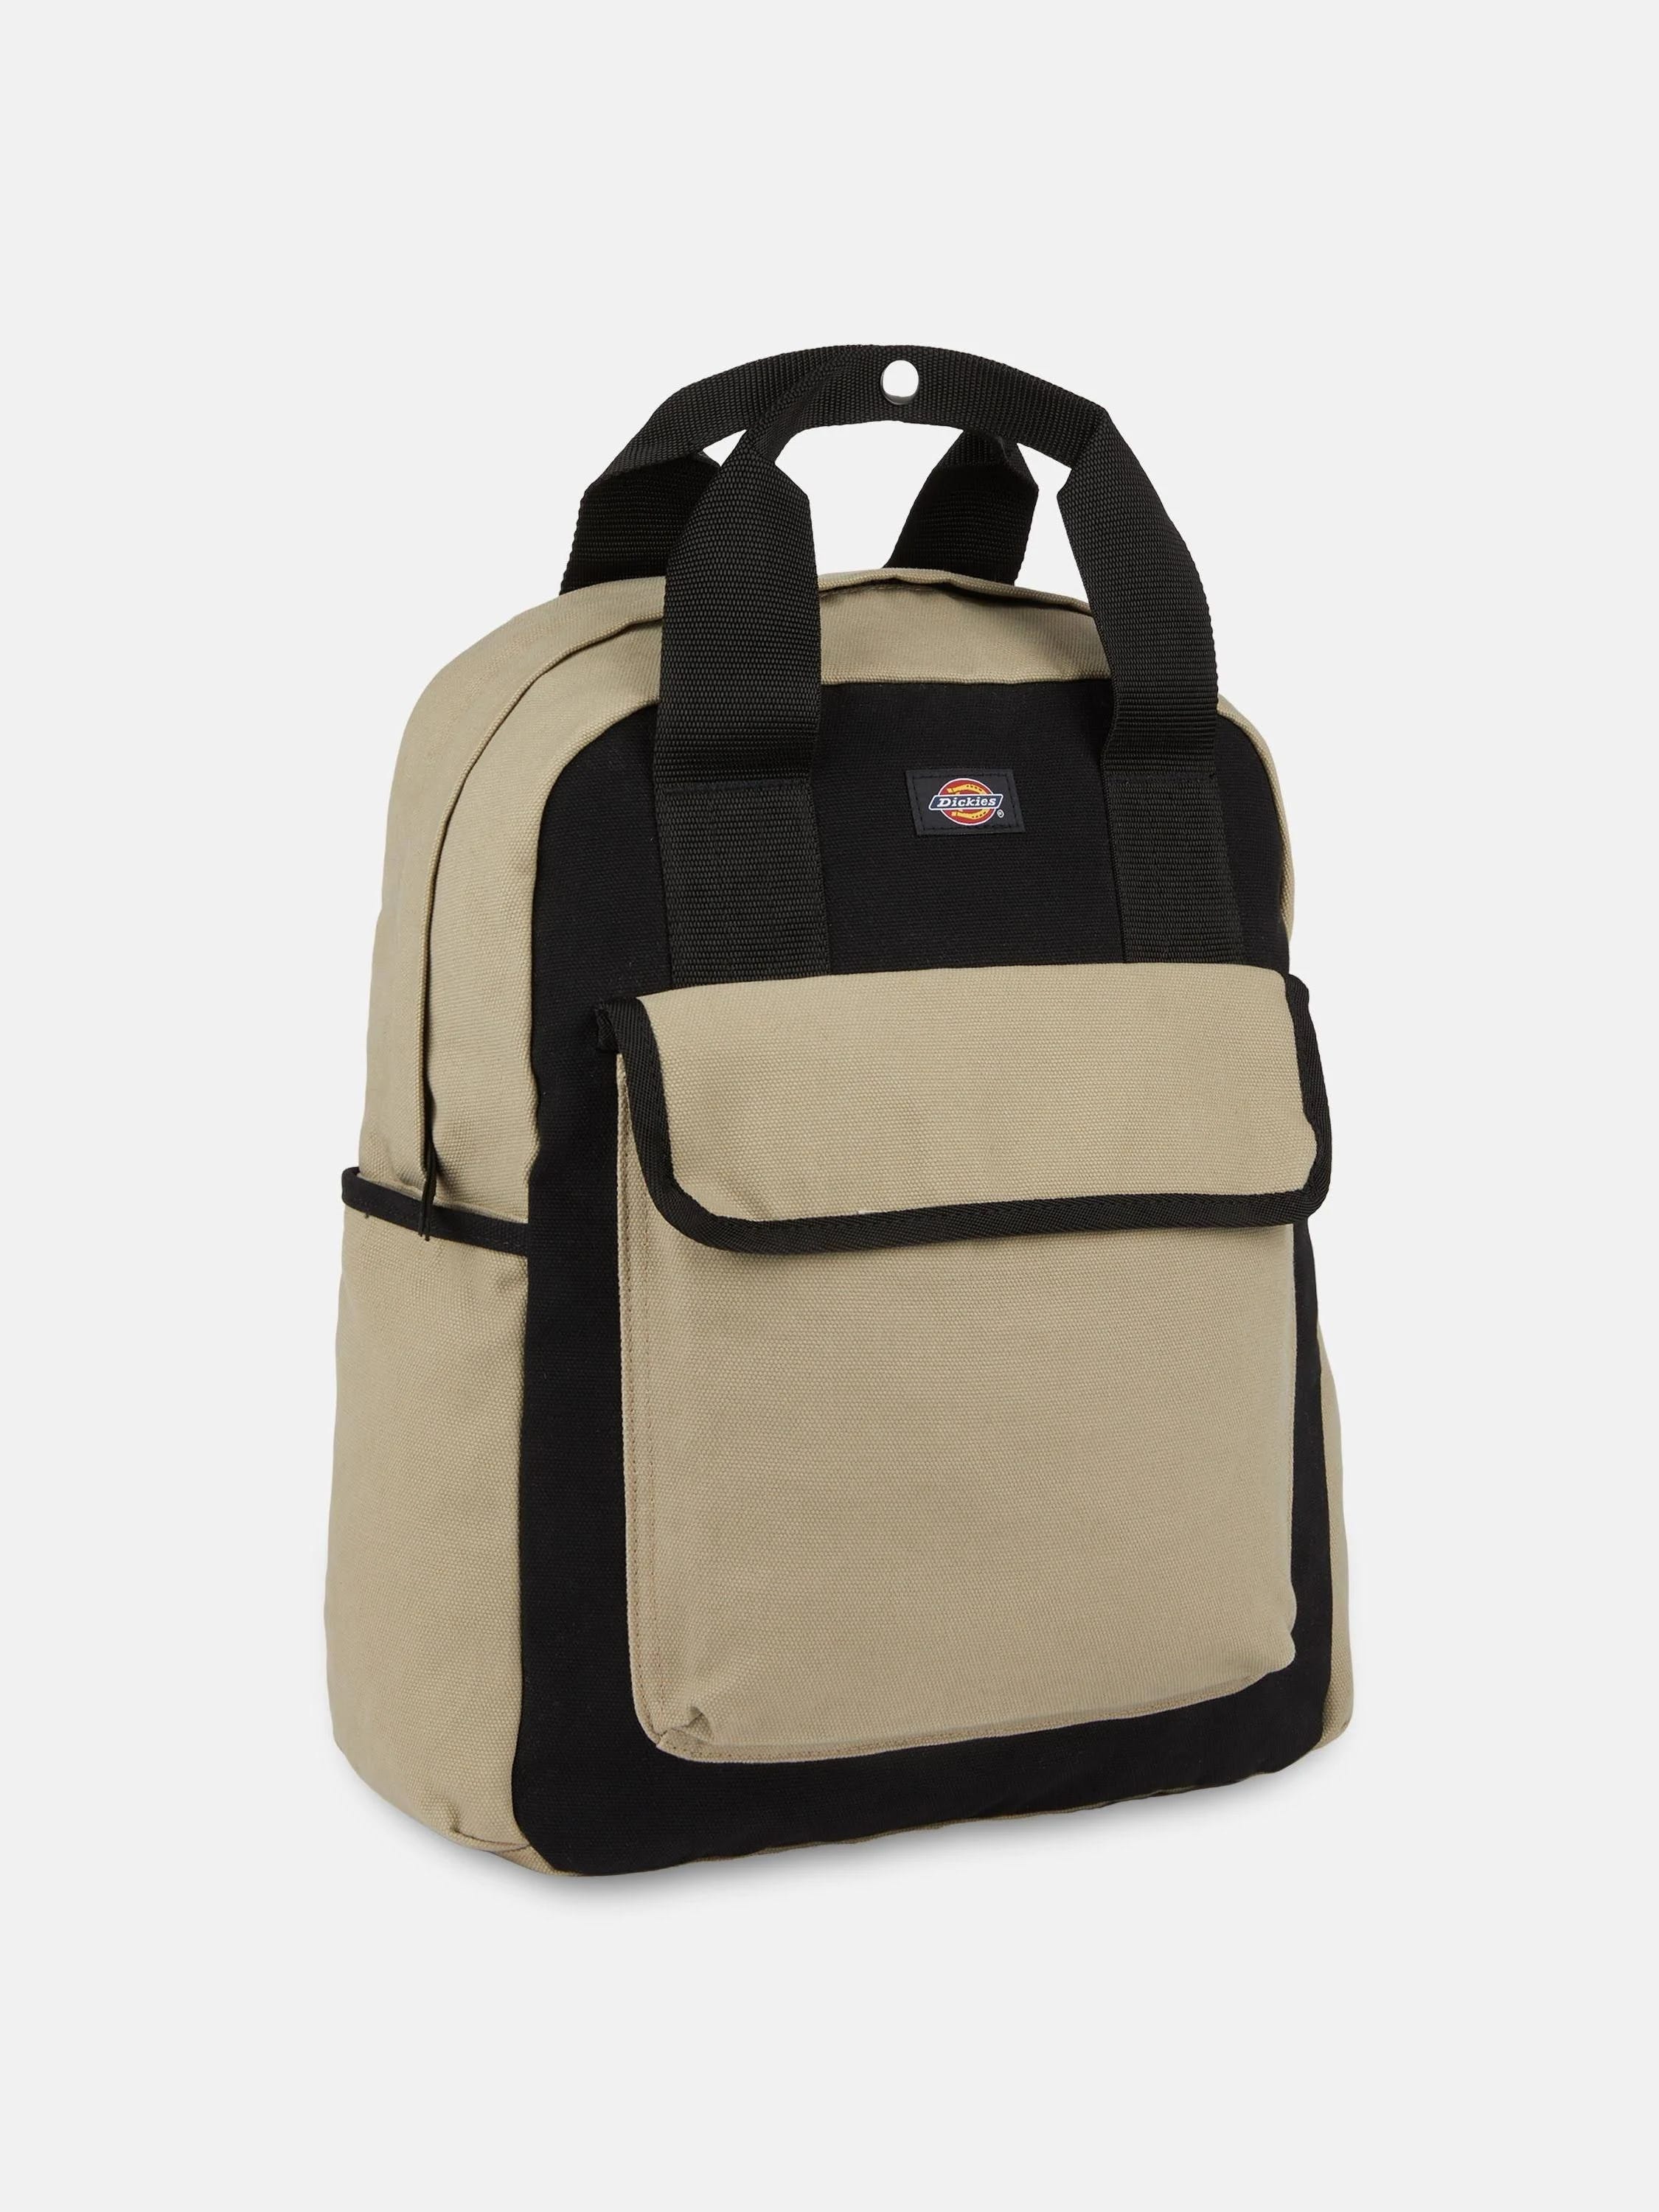 Comfortable Dickies Middleburg 16L Backpack for Everyday Use | Image